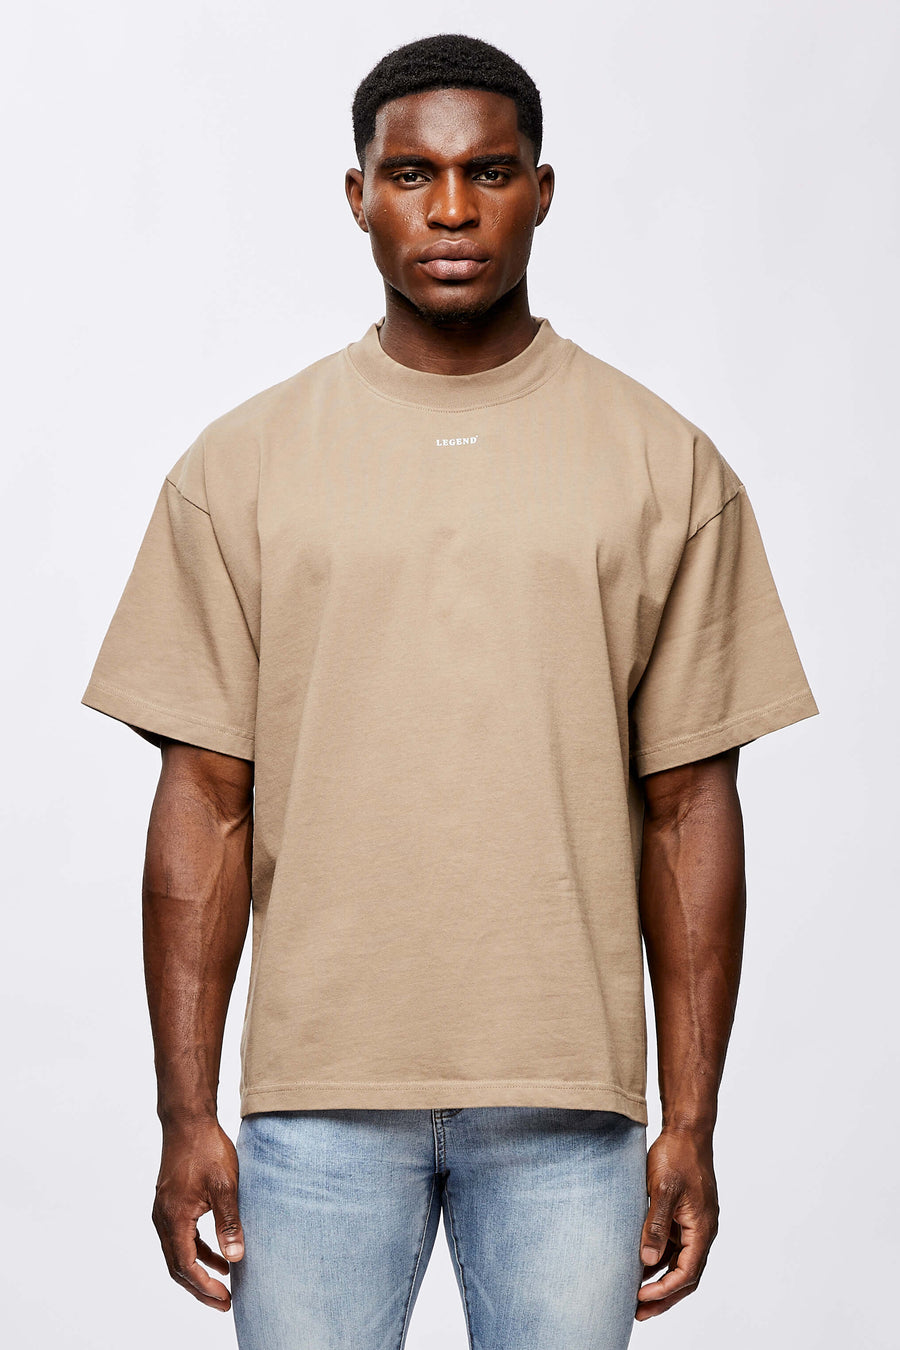 Legend London MICRO LOGO OVERSIZED T-SHIRT - TAUPE BROWN